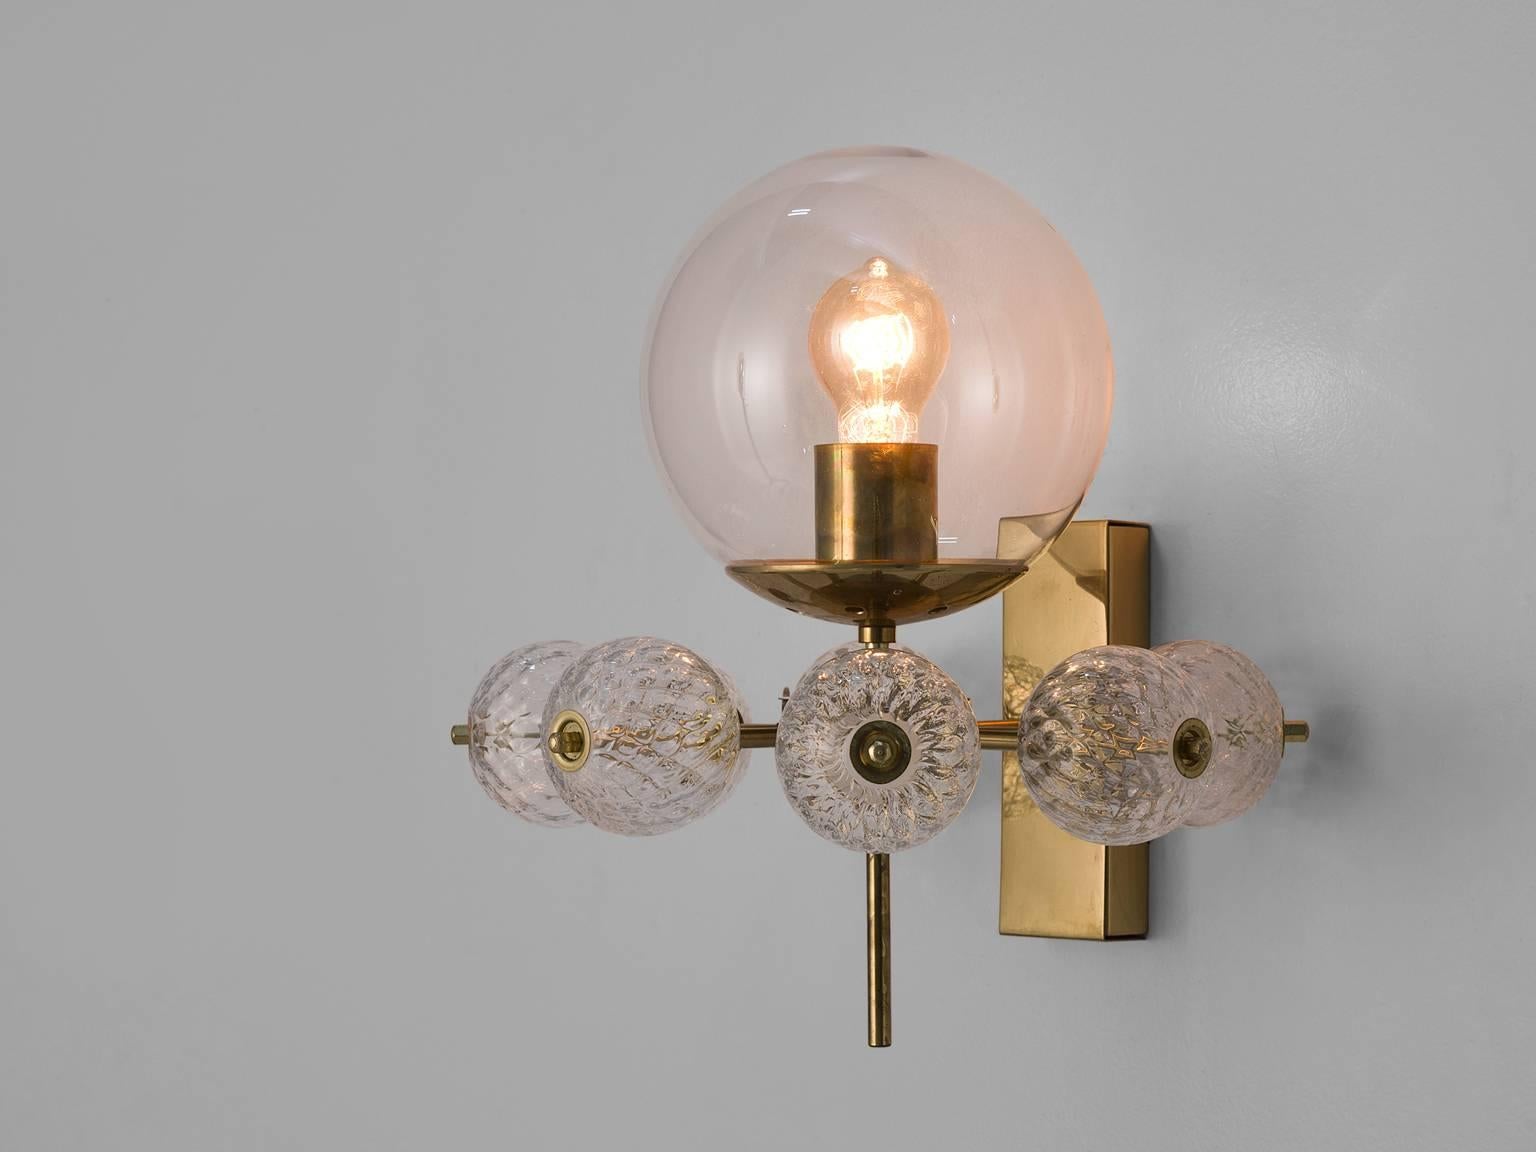 Wall chandelier in glass and brass, Europe, 1970s.

Ornate brass and glass wall light with one light points and a circle of structured, decorative glass globes underneath. The scone is beautifully decorated thanks to the structured glass. It shows a